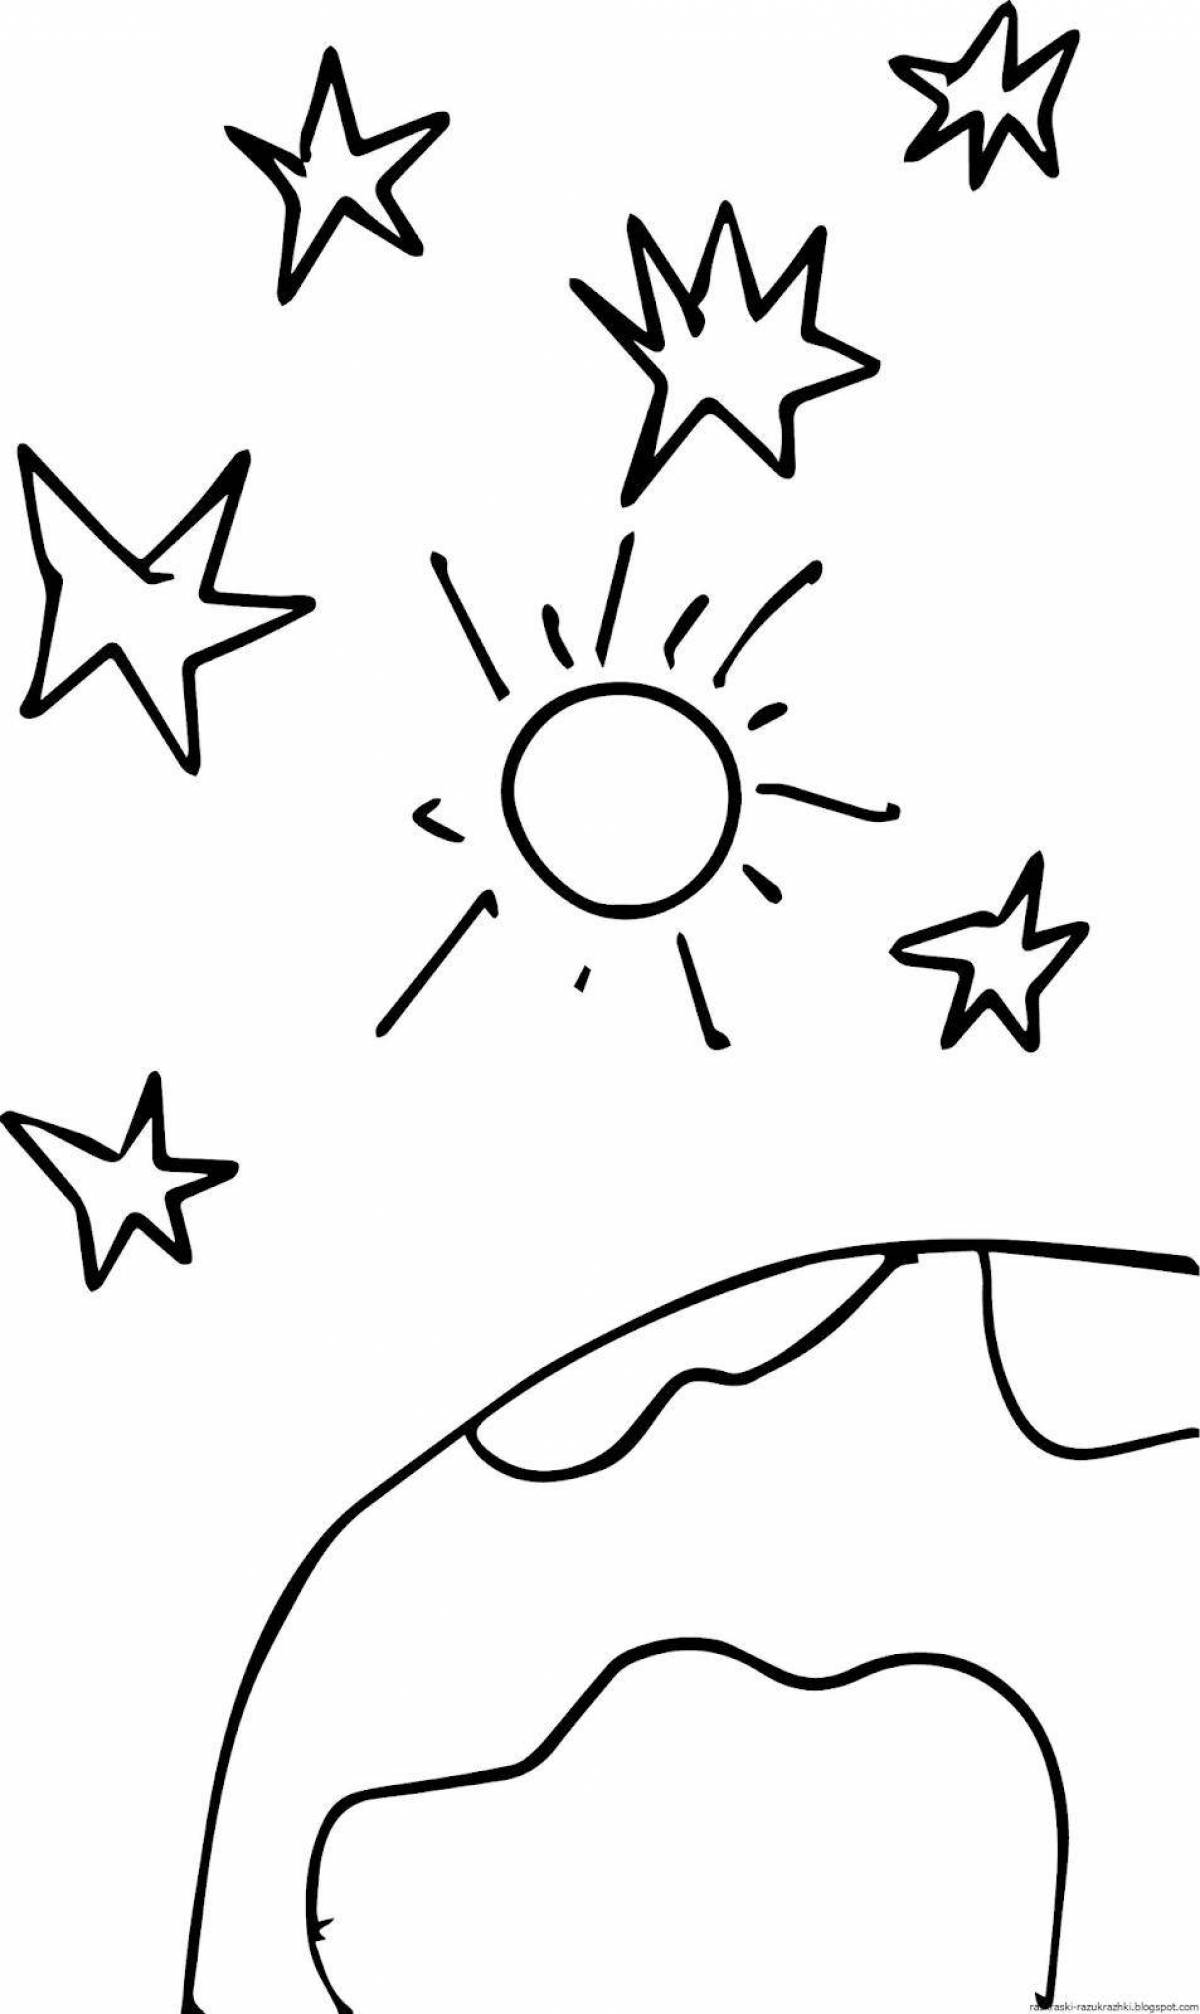 Exciting starry sky coloring book for kids